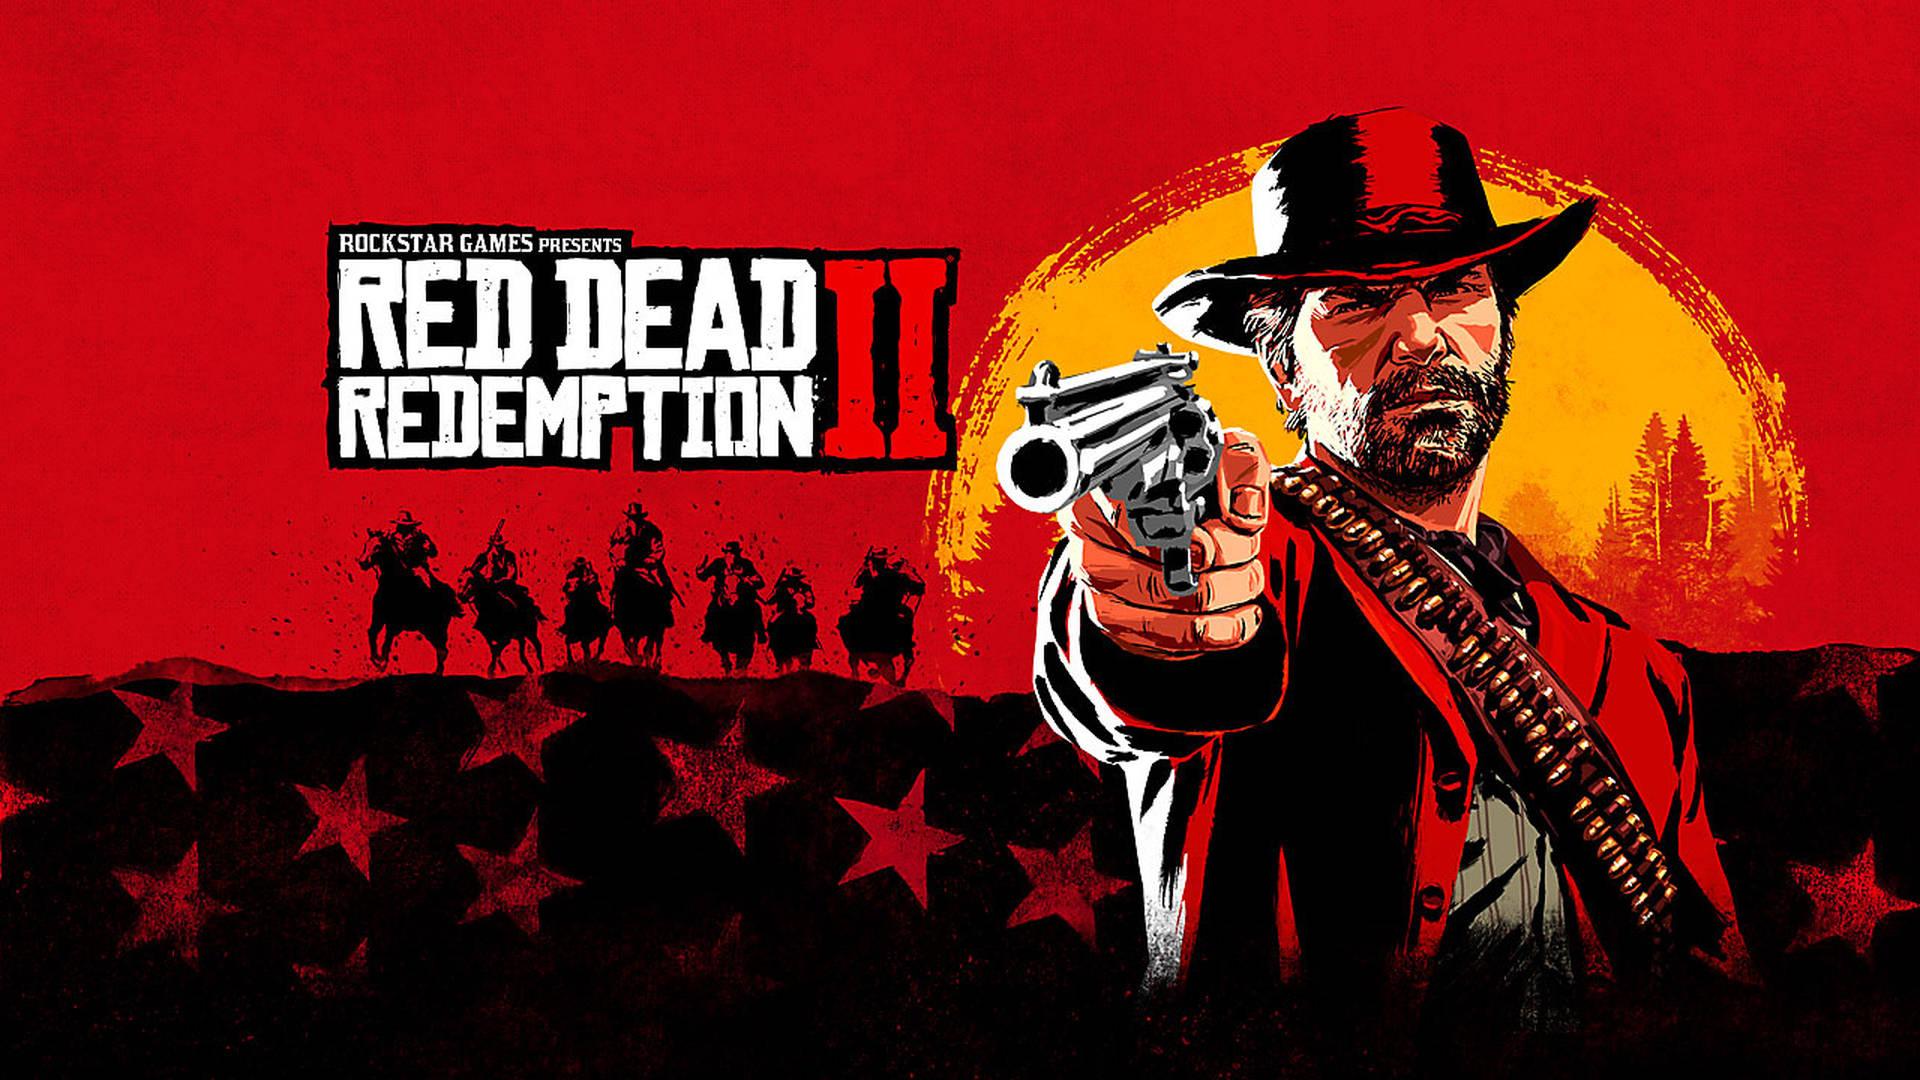 How the music for Red Dead Redemption 2 is inspired